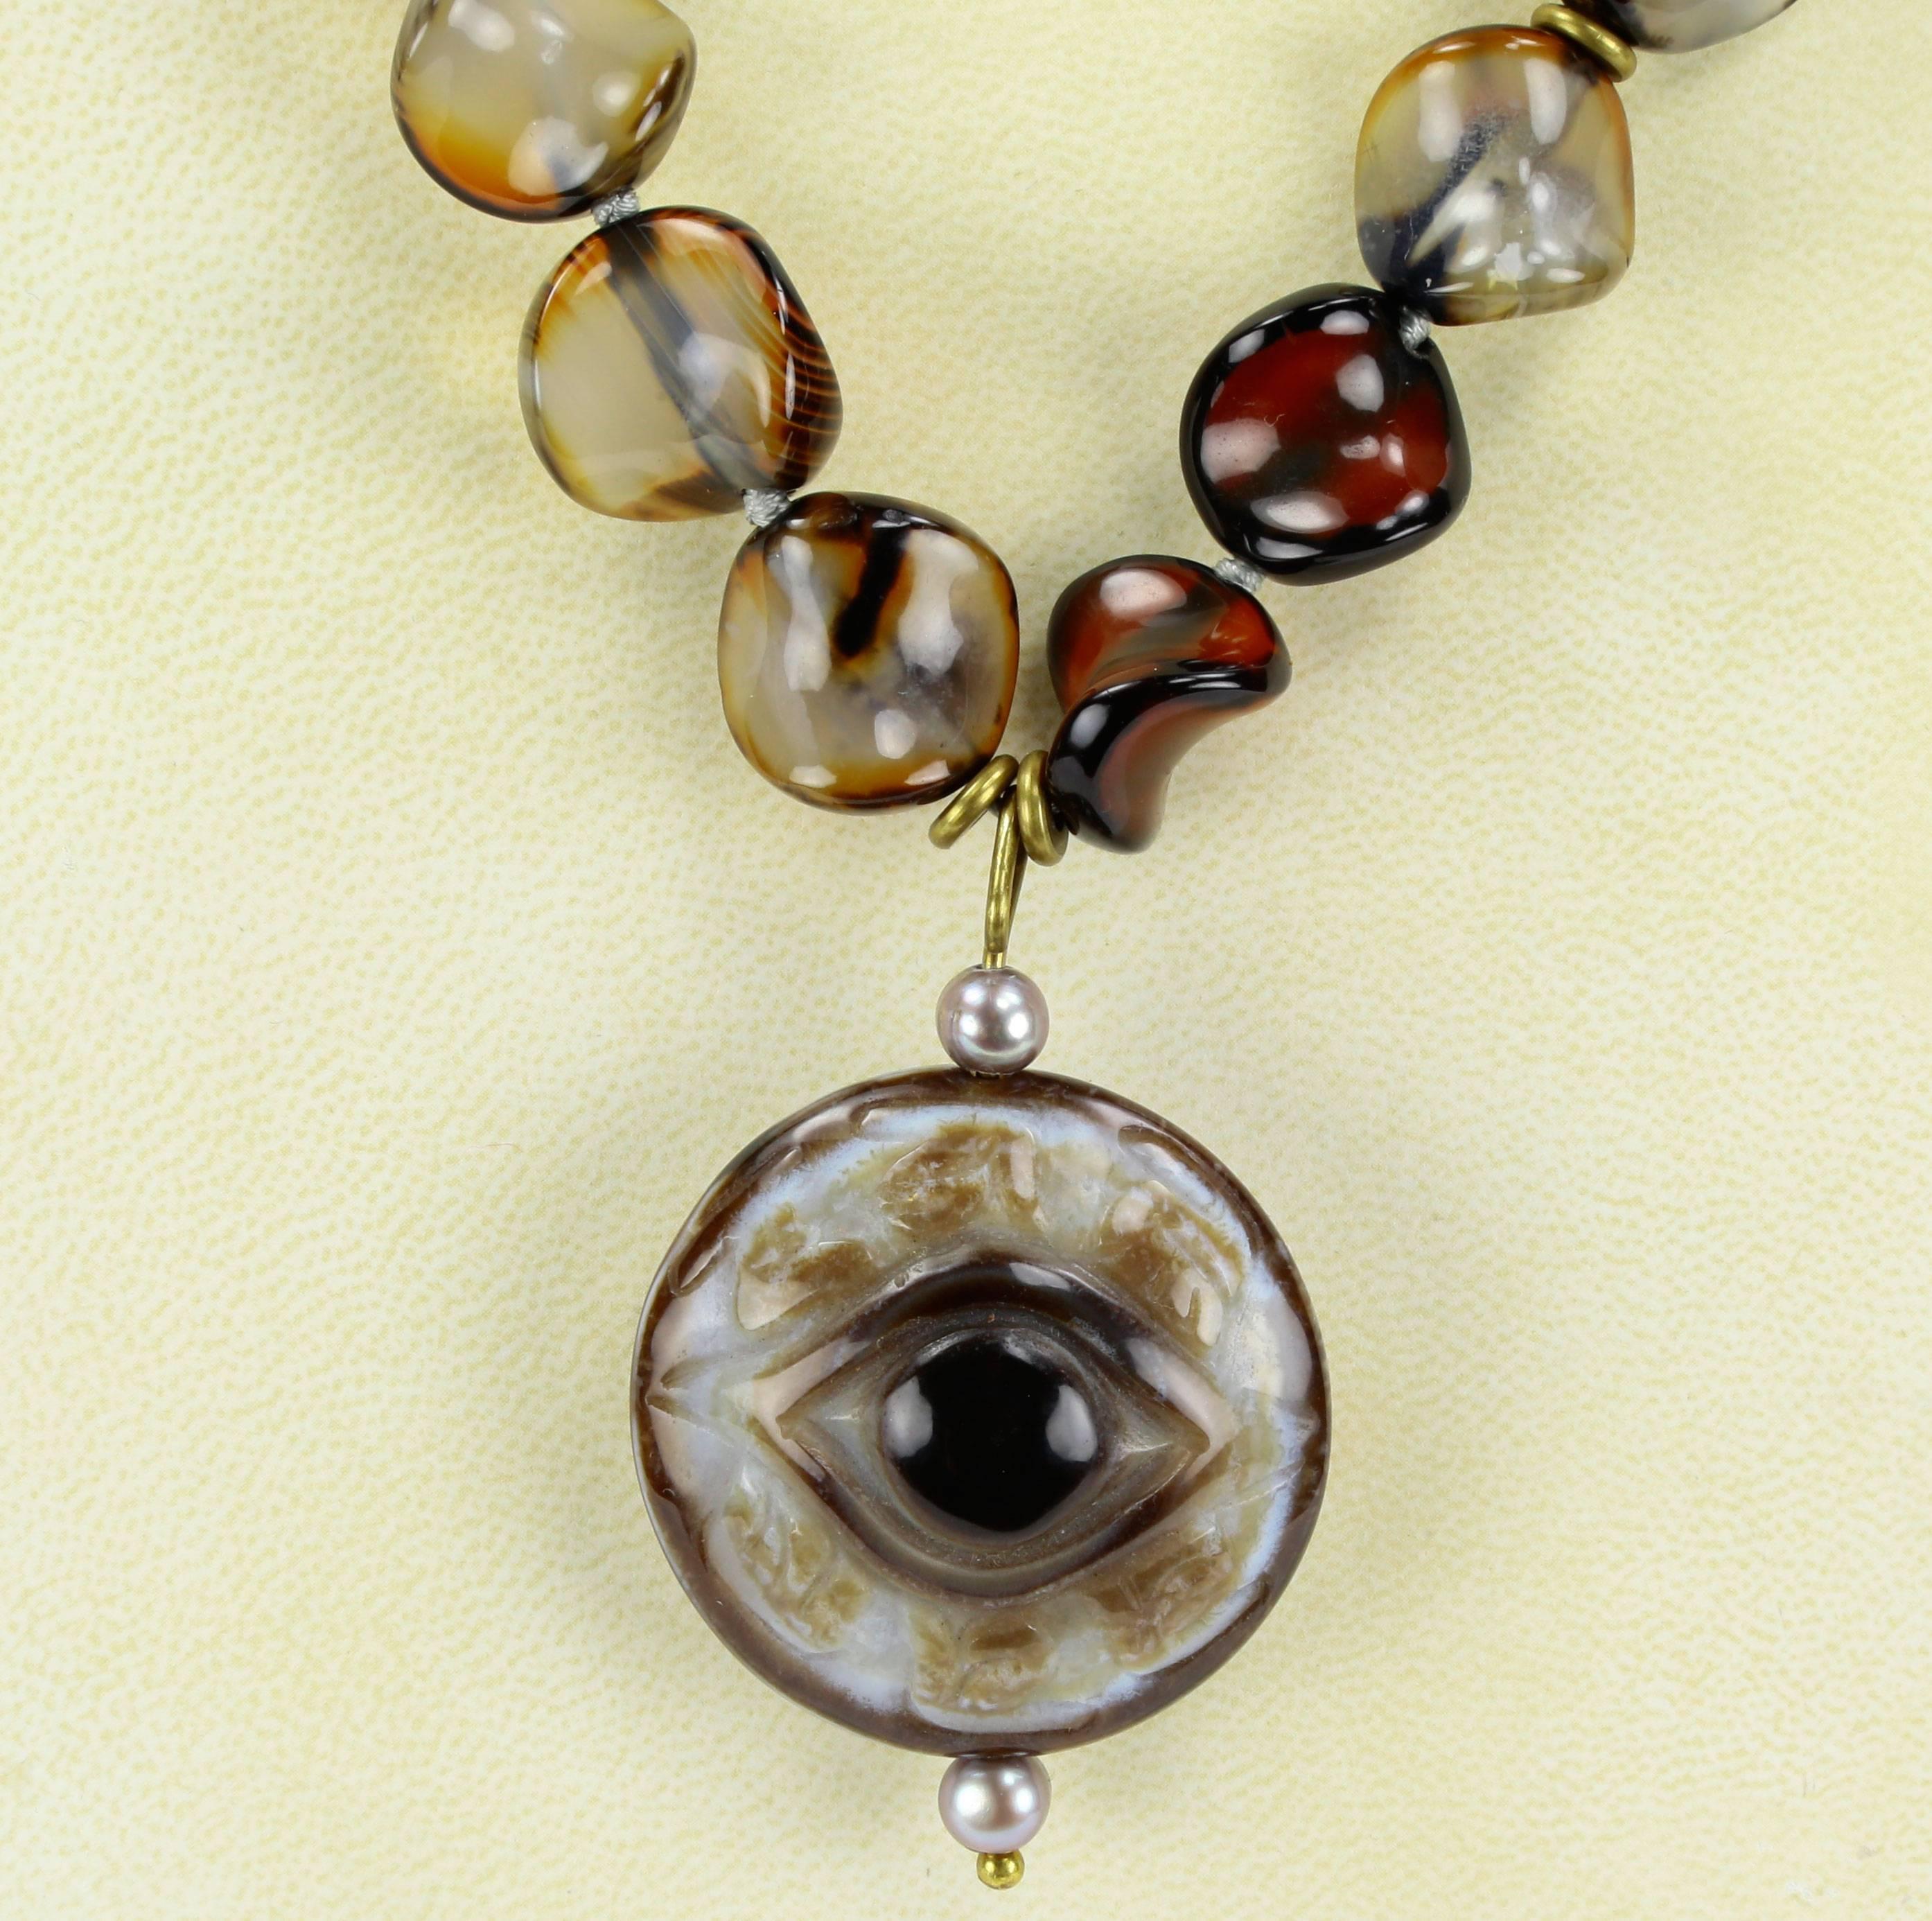 Outstanding Unique ‘Thump grip’ Carnelian and ‘Evil Eye’ Runway Pendant Necklace, suspending a large round ‘Evil Eye’ pendant; approx. 2.5 inches long x 1.6 inch diameter; 33 Carnelian beads hand knotted with silk thread; each approx. 19mm x 17.5mm;